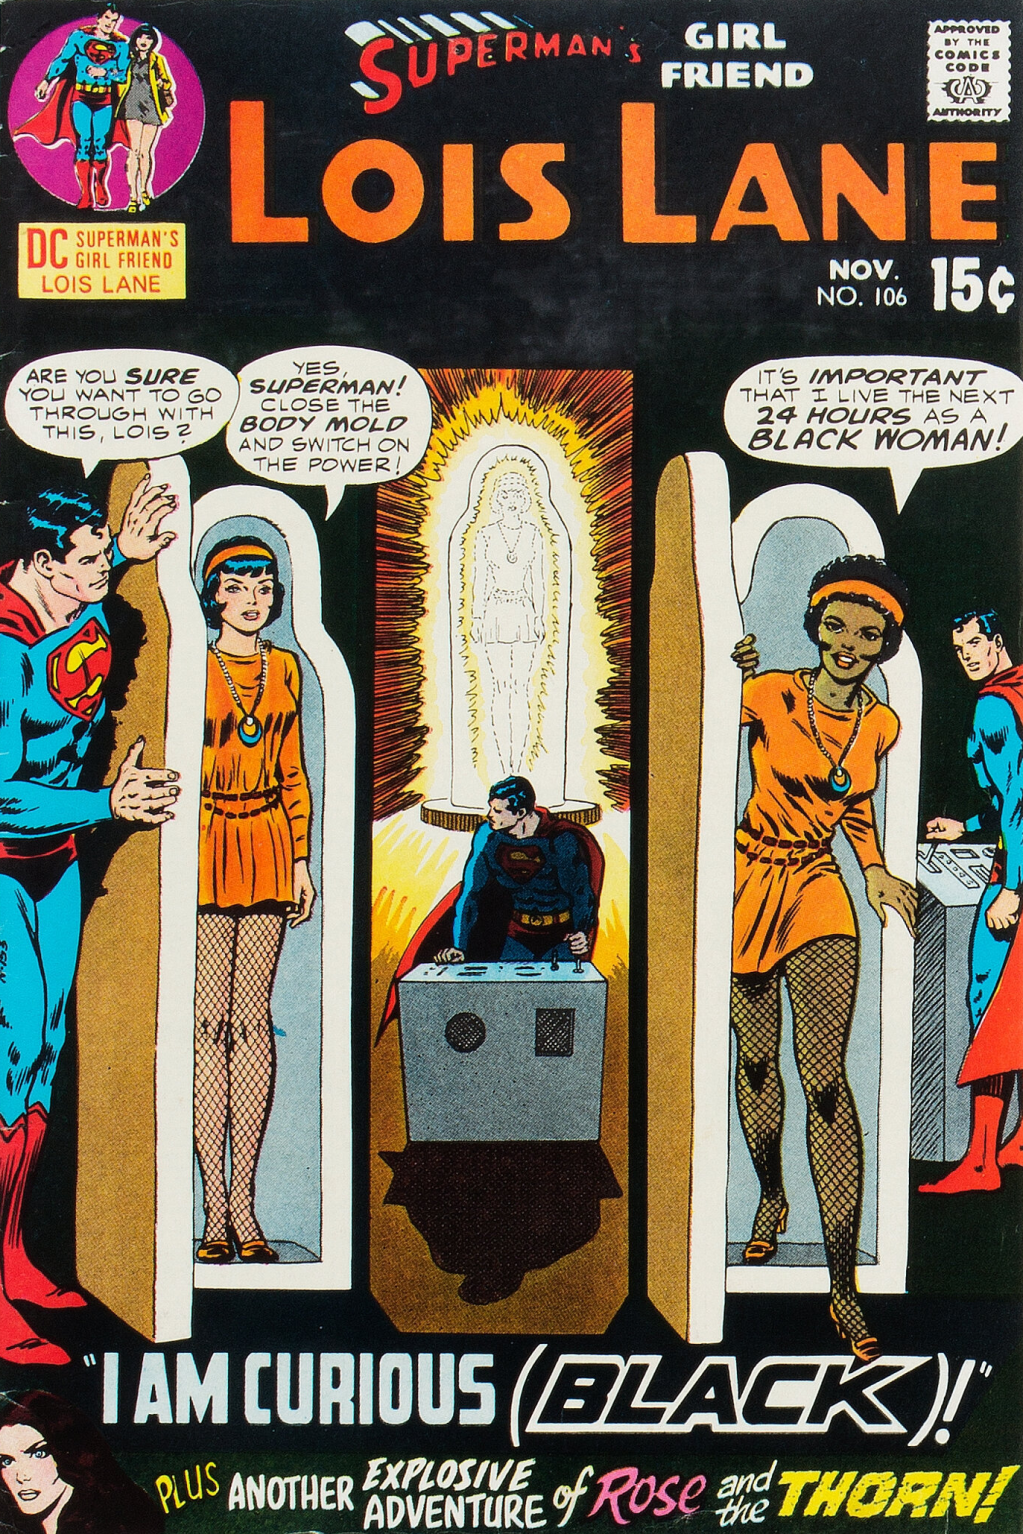 Lois Lane prepares to undergo a peculiar experiment on Curt Swan, Murphy Anderson, and Gaspar Saladino's cover to Superman's Girlfriend, Lois Lane Vol. 1 #106 "I Am Curious (Black)!" (1970), DC